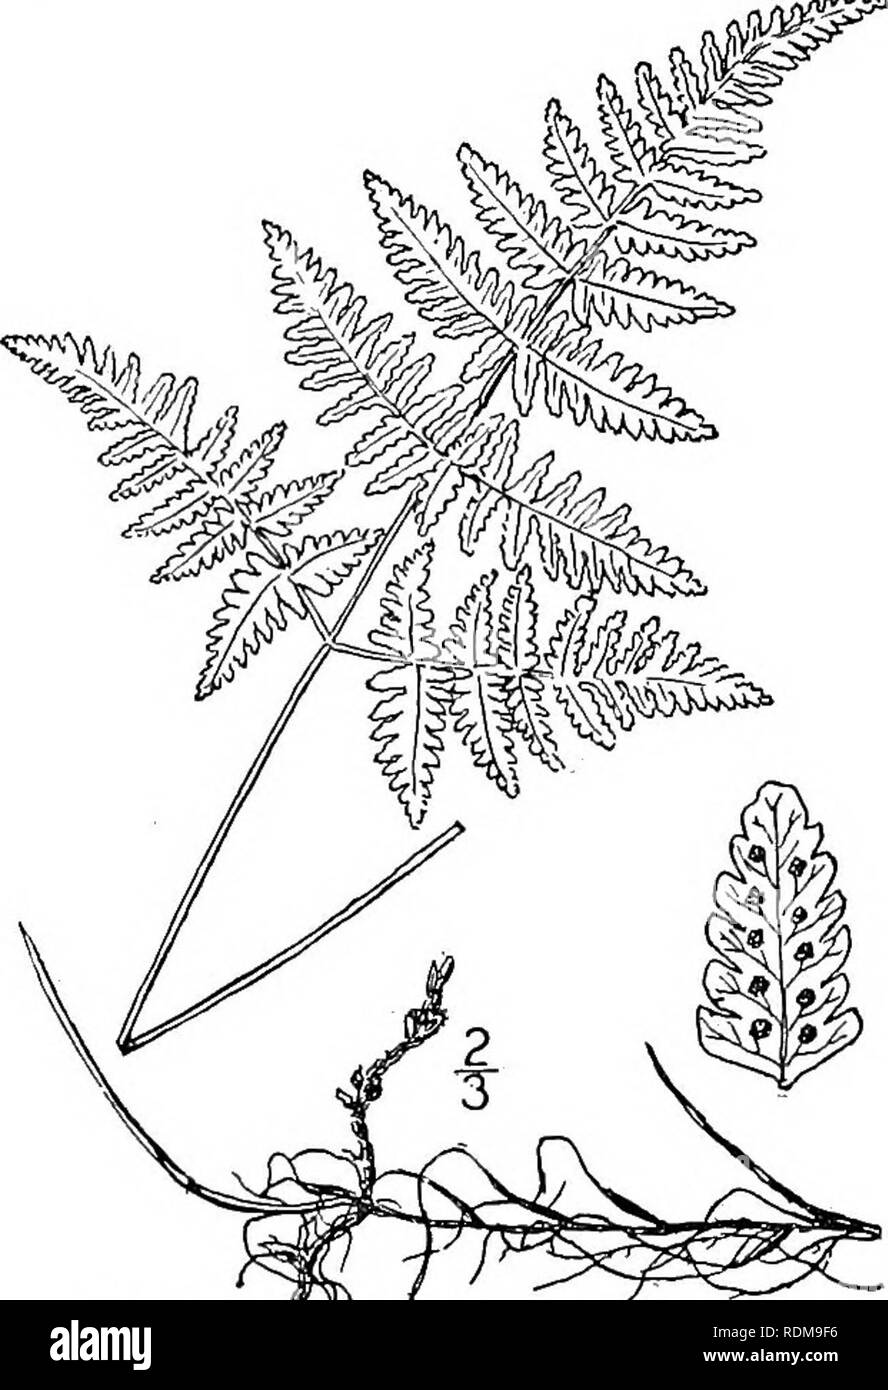 . An illustrated flora of the northern United States, Canada and the British possessions, from Newfoundland to the parallel of the southern boundary of Virginia, and from the Atlantic Ocean westward to the 102d meridian. Botany; Botany. POLYPODIACEAE. Vol. I. 17. Dryopteris Robertiana (Hoffm.) C. Chr. Scented Oak-fern. Fig. 53. Polypodium Robertianum Hoffm. Deutschl. Fl. 2: [add. 4]. 1795- Phegopteris Robertiana A. Br.; Aschers. Fl. Brand. 2 : 198. 1859. Polypodium calcareum Sm. Fl. Brit. 1117. 1804. Phegopteris calcarea Fee, Gen. Fil. 243. 1850-52. Rootstock slender, creeping, branched. Stipe Stock Photo